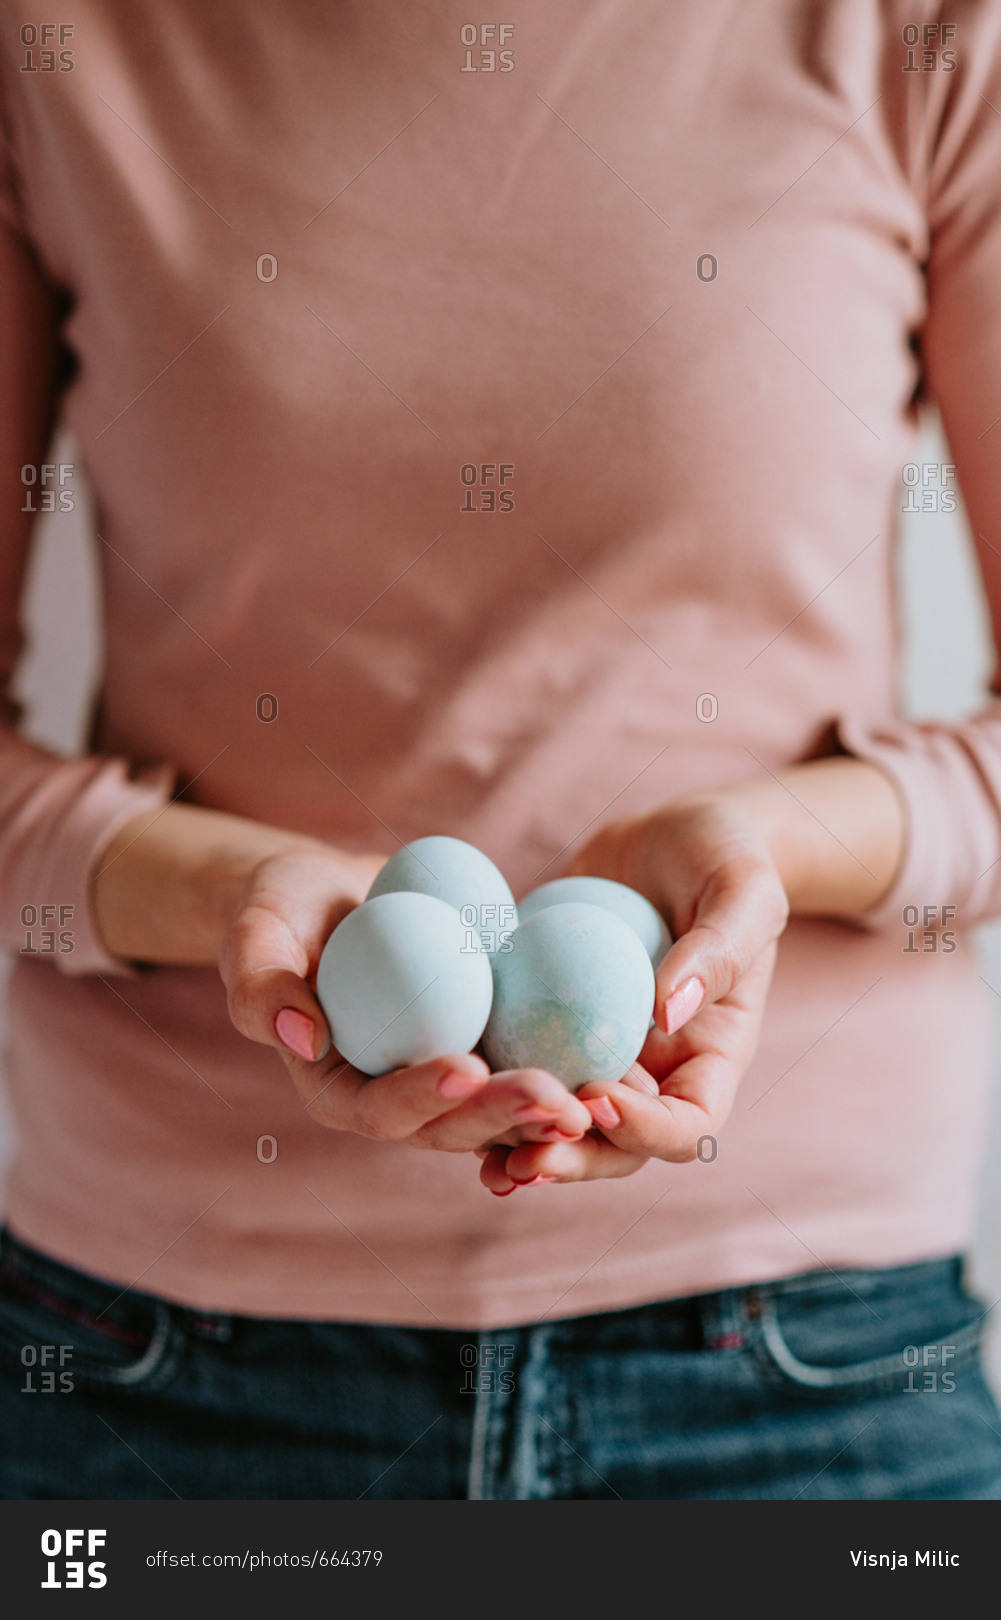 Woman wearing pastel colors holding pastel Easter eggs in her hands